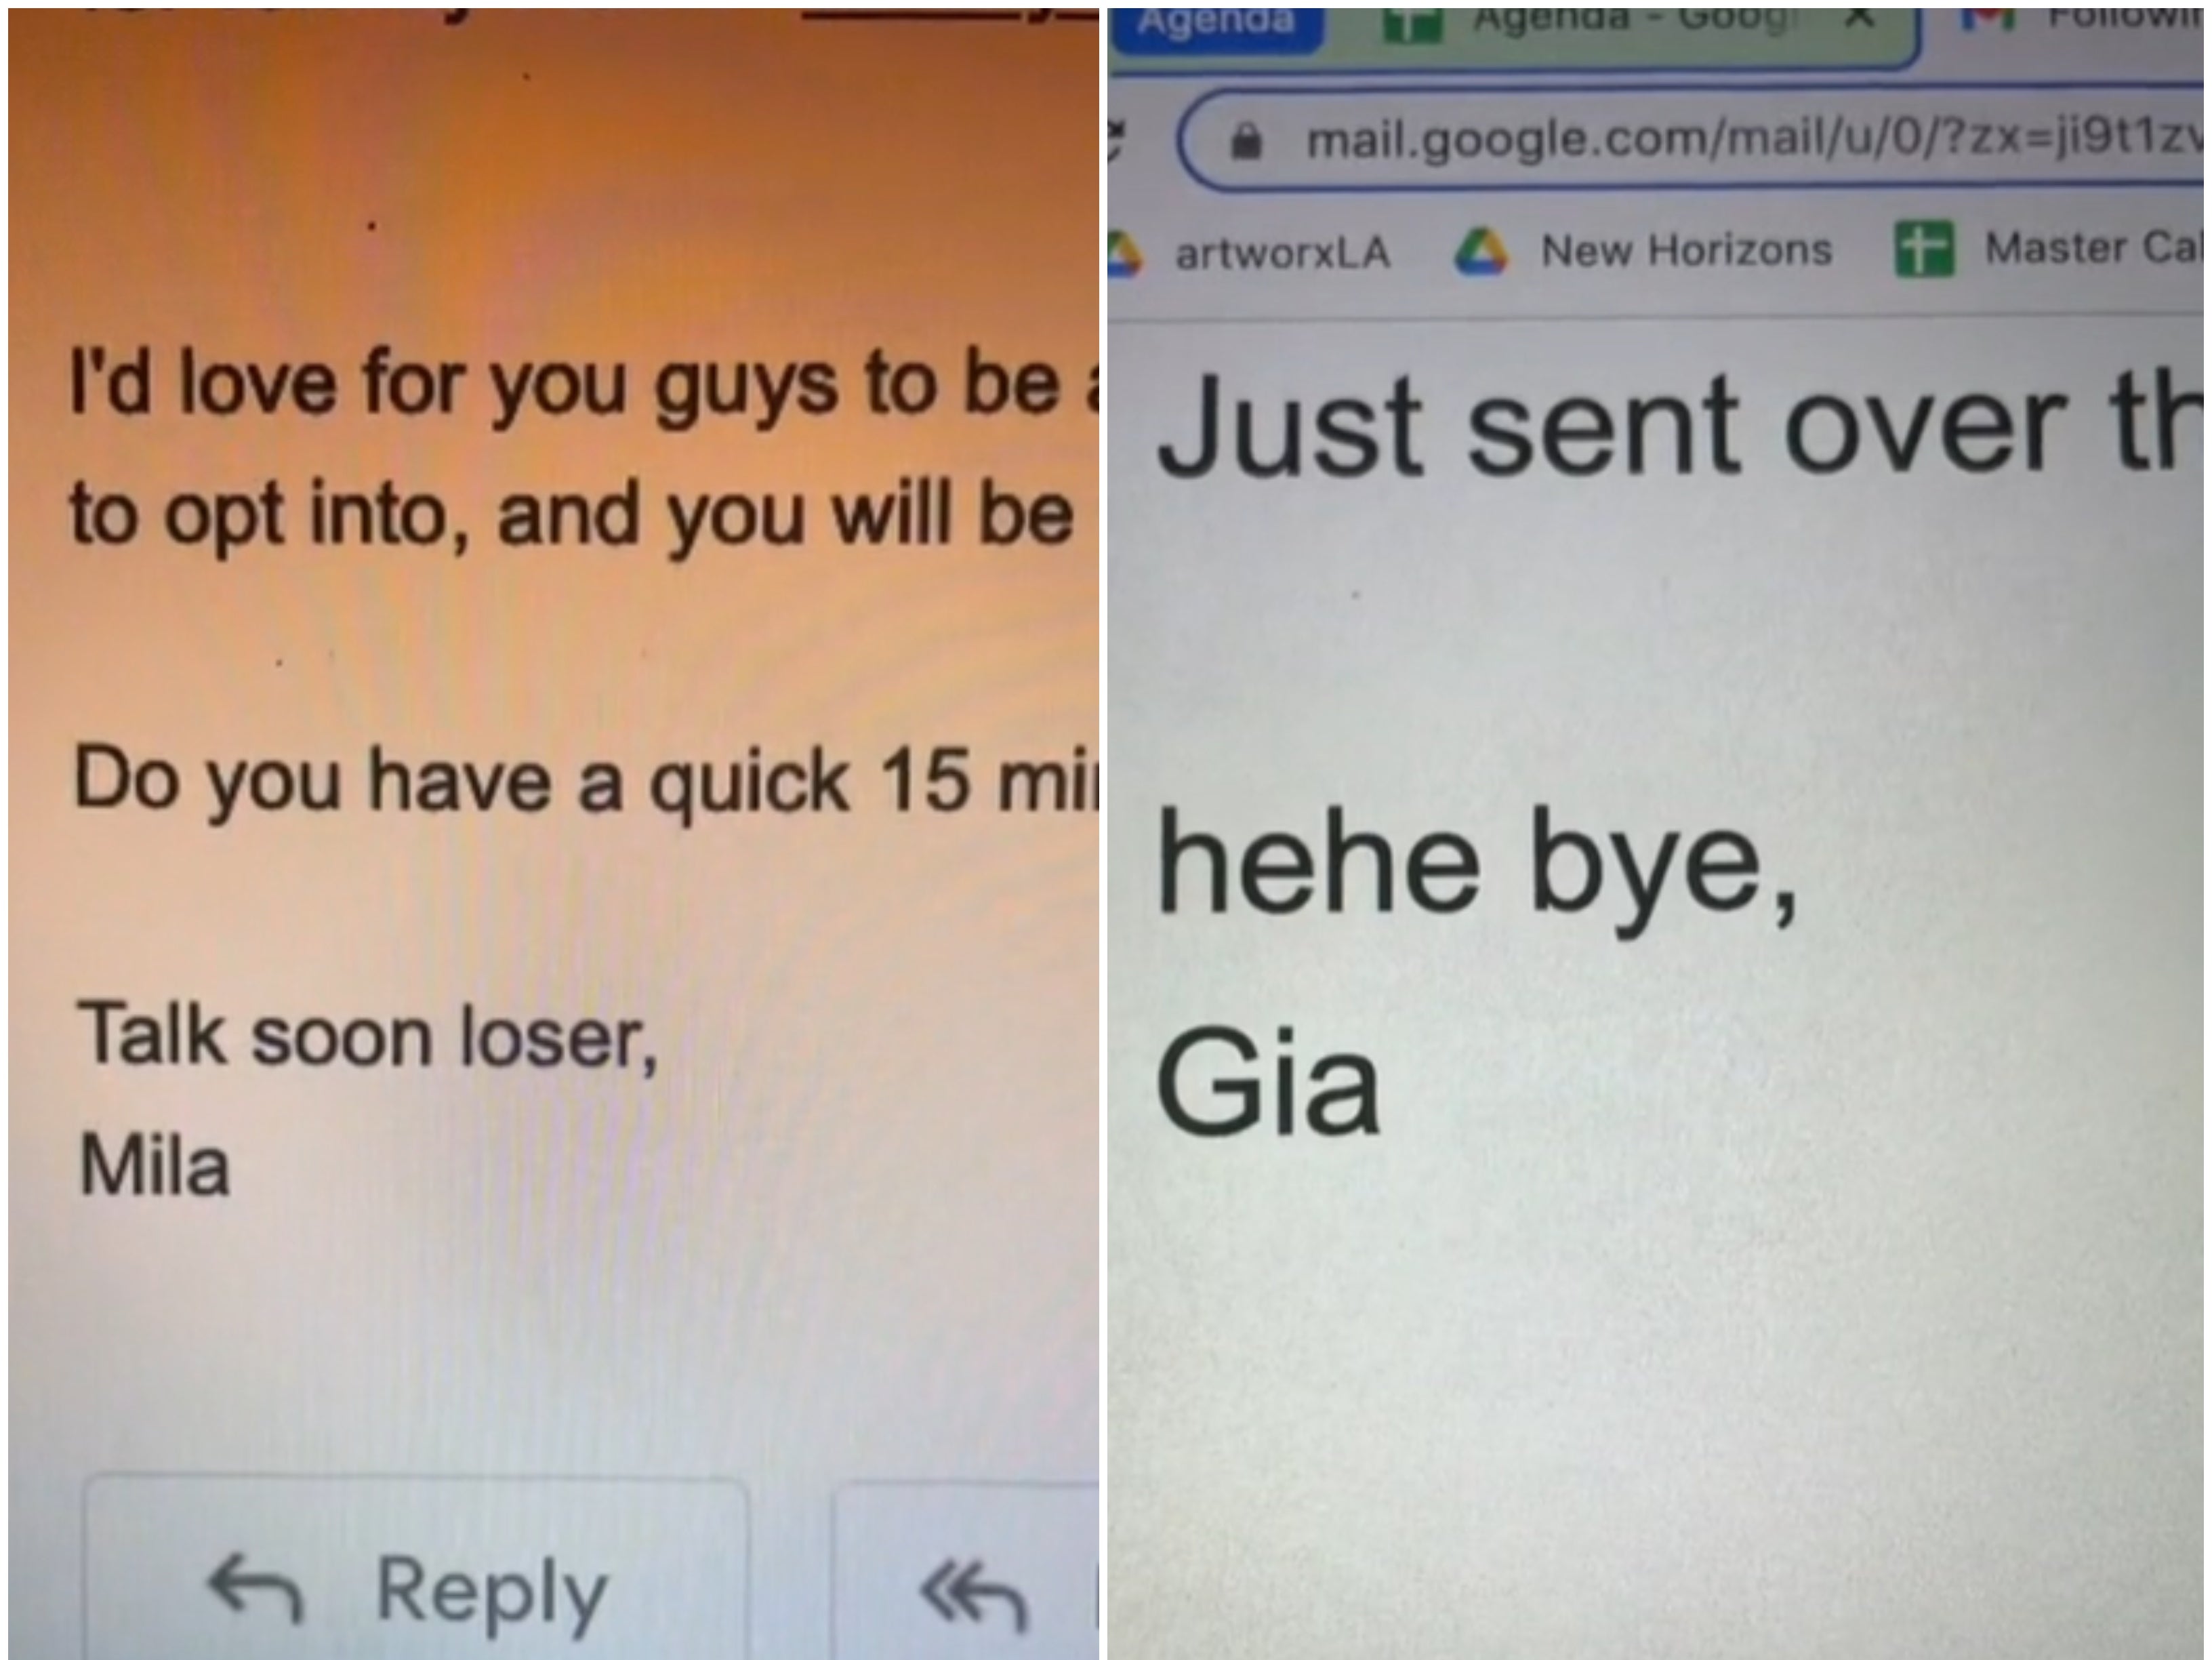 ‘hehe bye’ and talk soon loser’ are acceptable email sign-offs in some workplaces